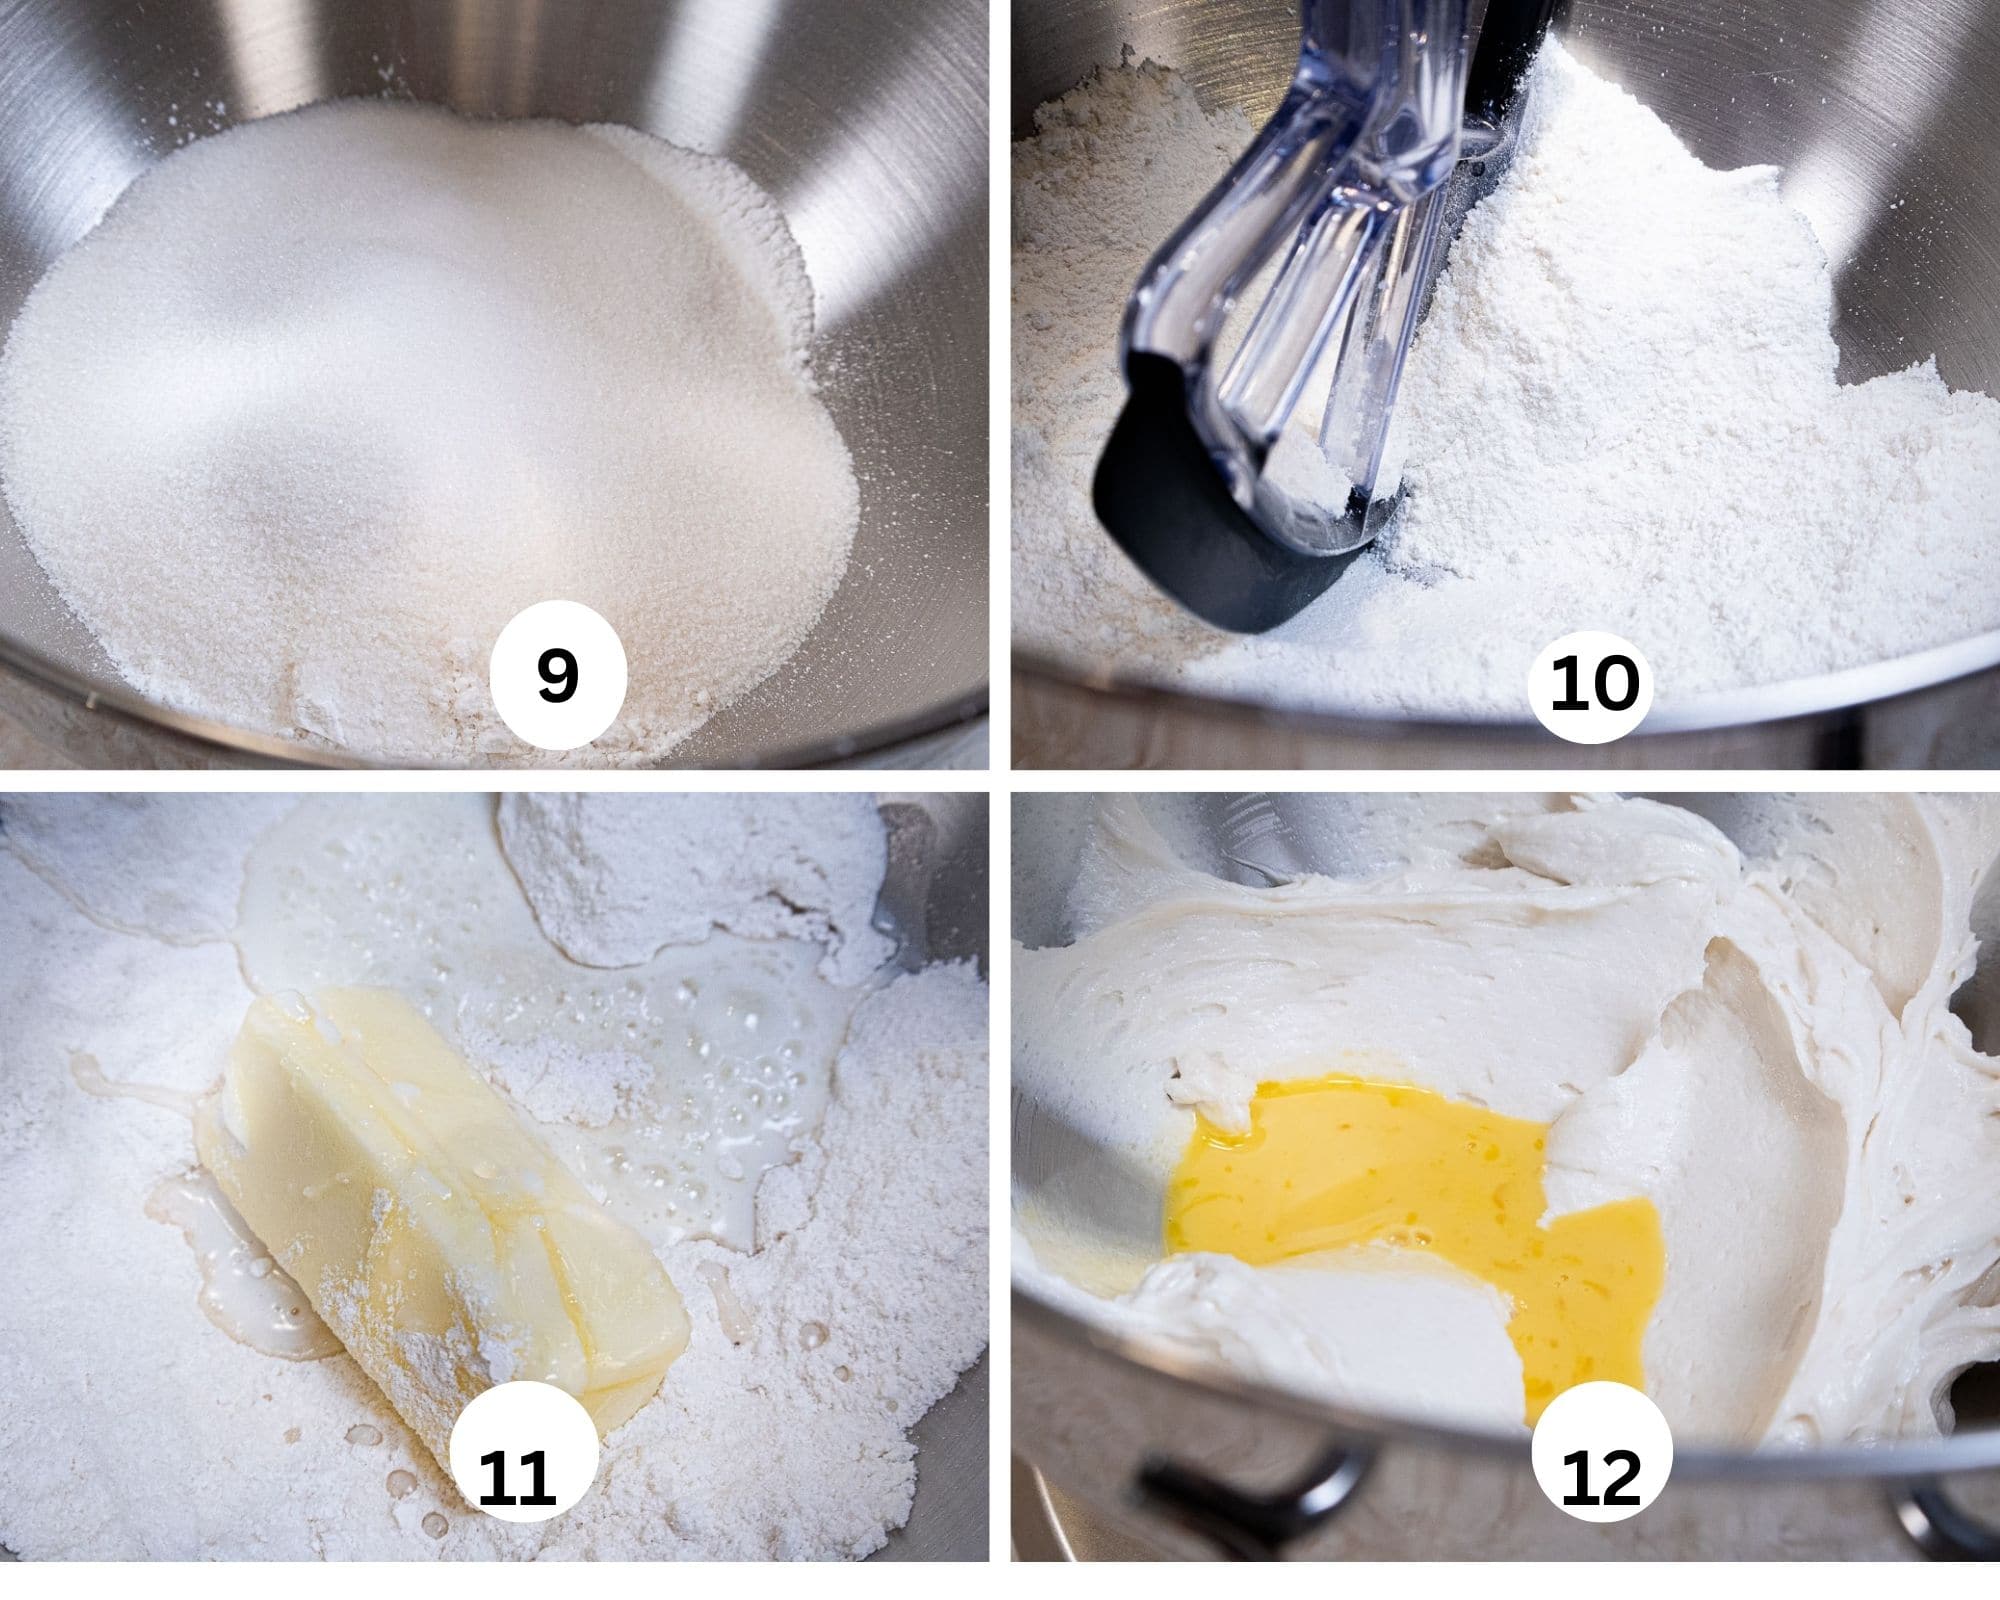 The third collage shows the dry ingredients in a mixing bowl, then mixed, the butter added, and the first addition of liquid. 